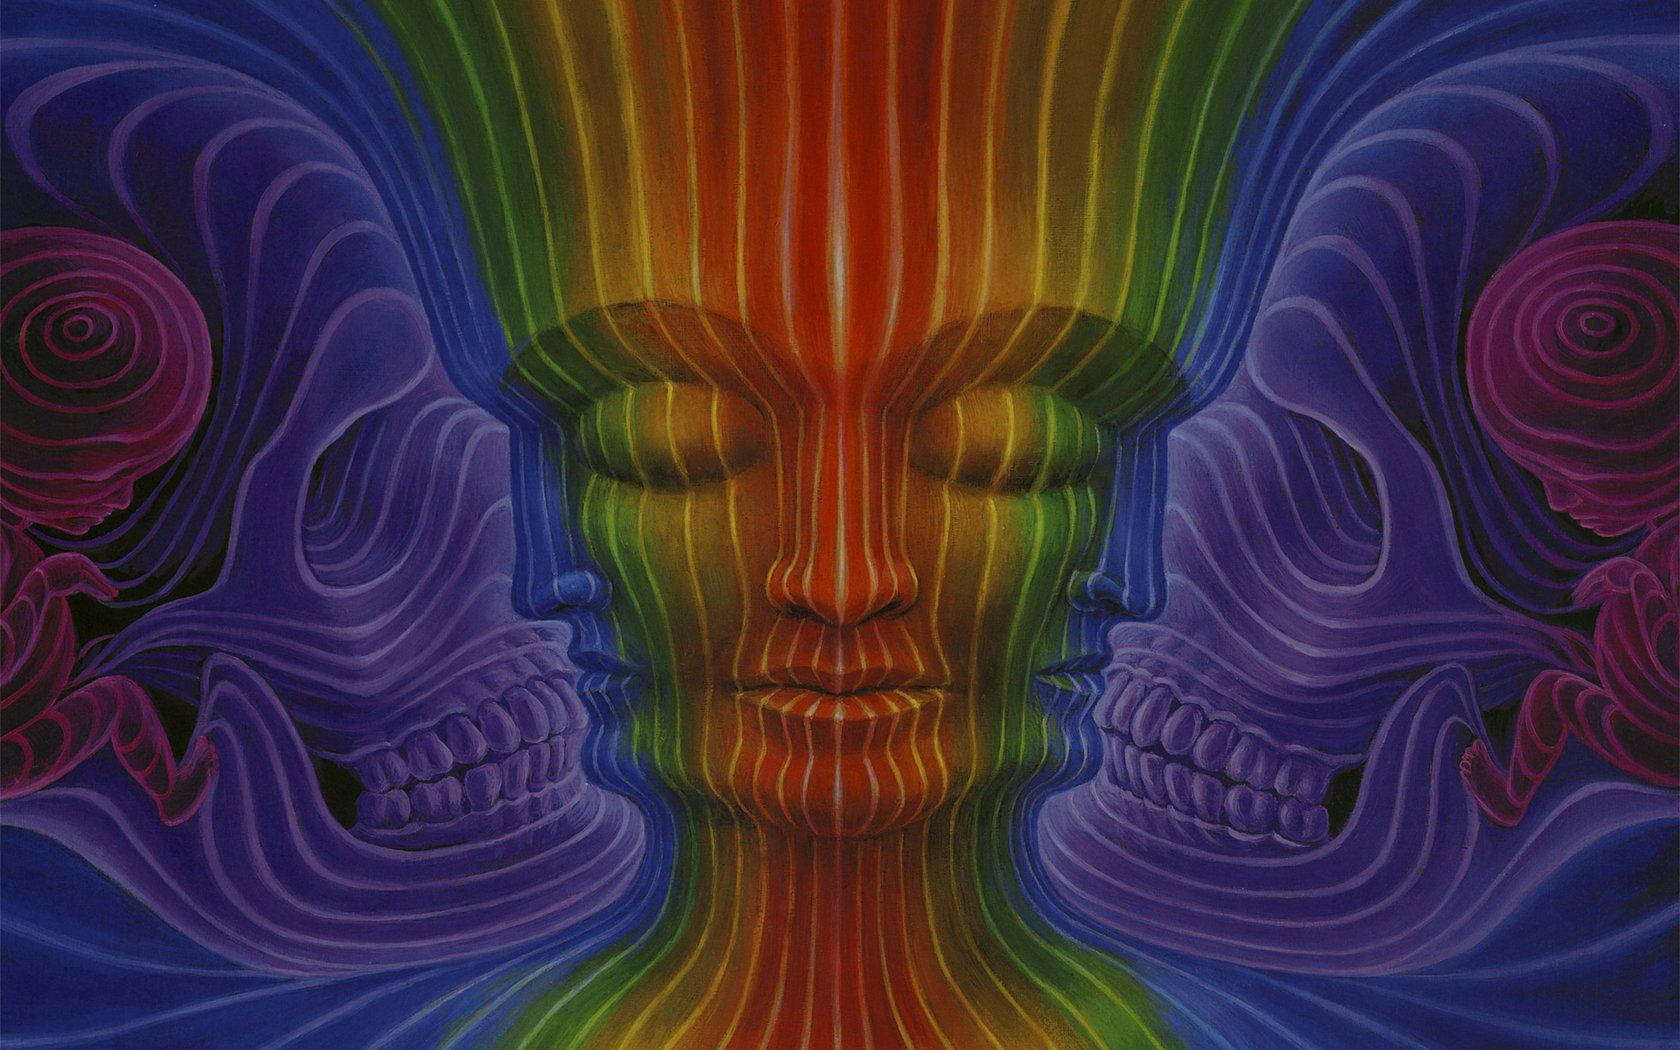 The vibrant colors of Tool's Rainbow Visual Wallpaper